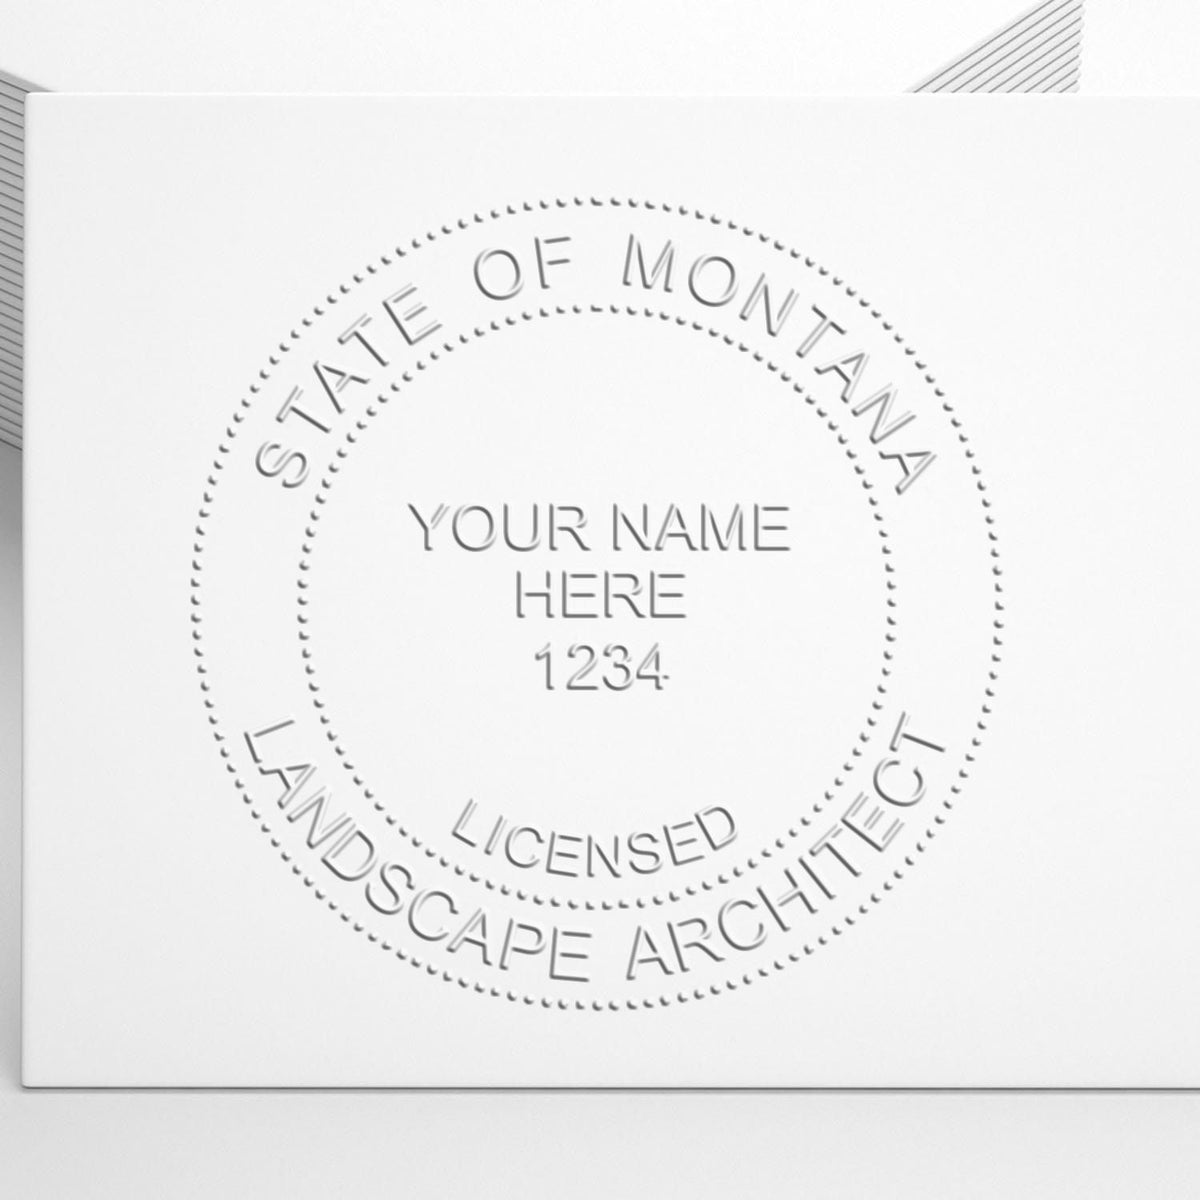 An in use photo of the Hybrid Montana Landscape Architect Seal showing a sample imprint on a cardstock